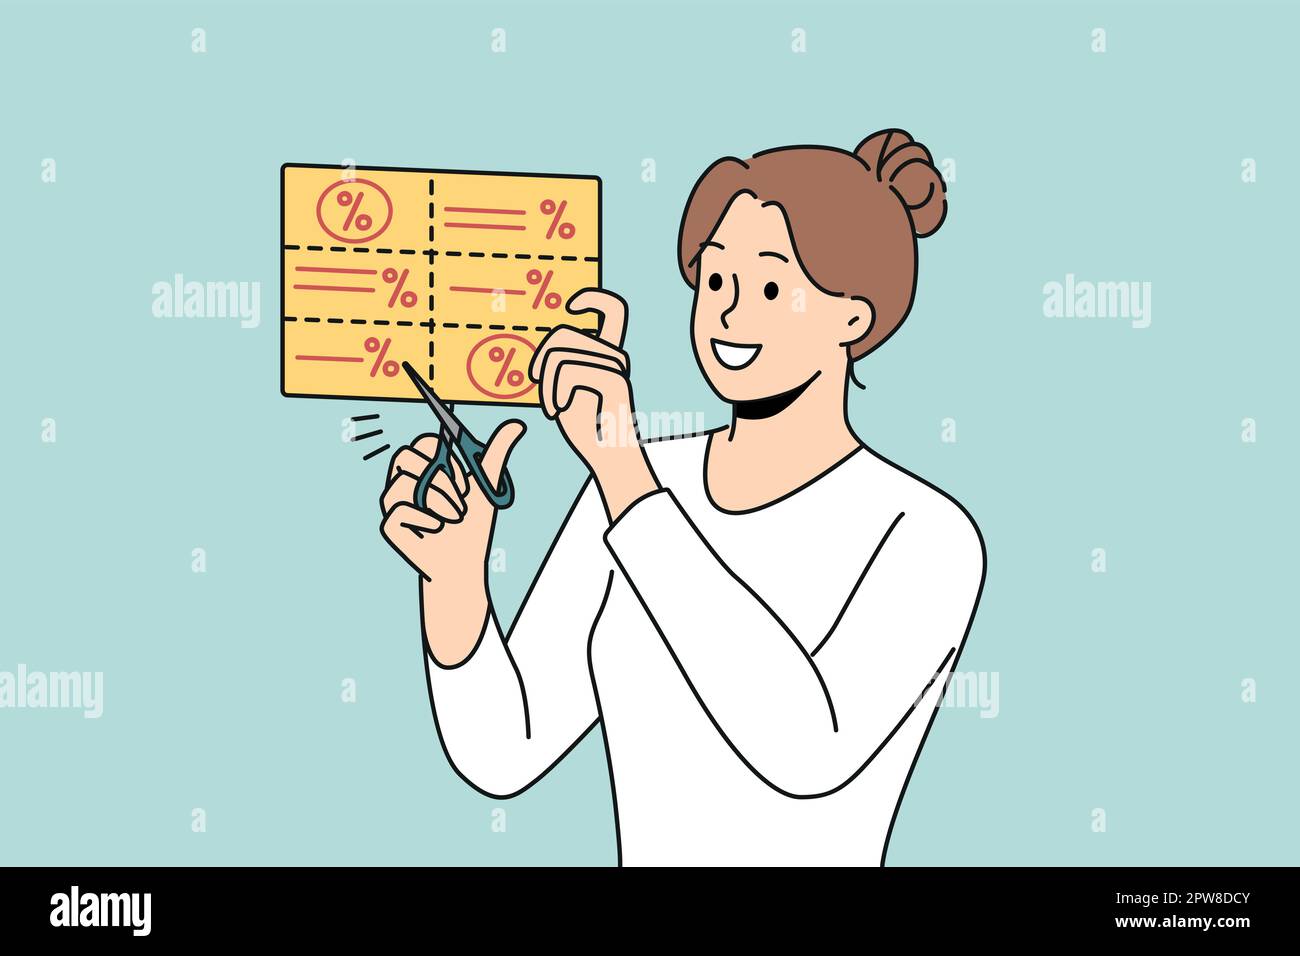 WebSmiling woman cut promotion coupons Stock Vector